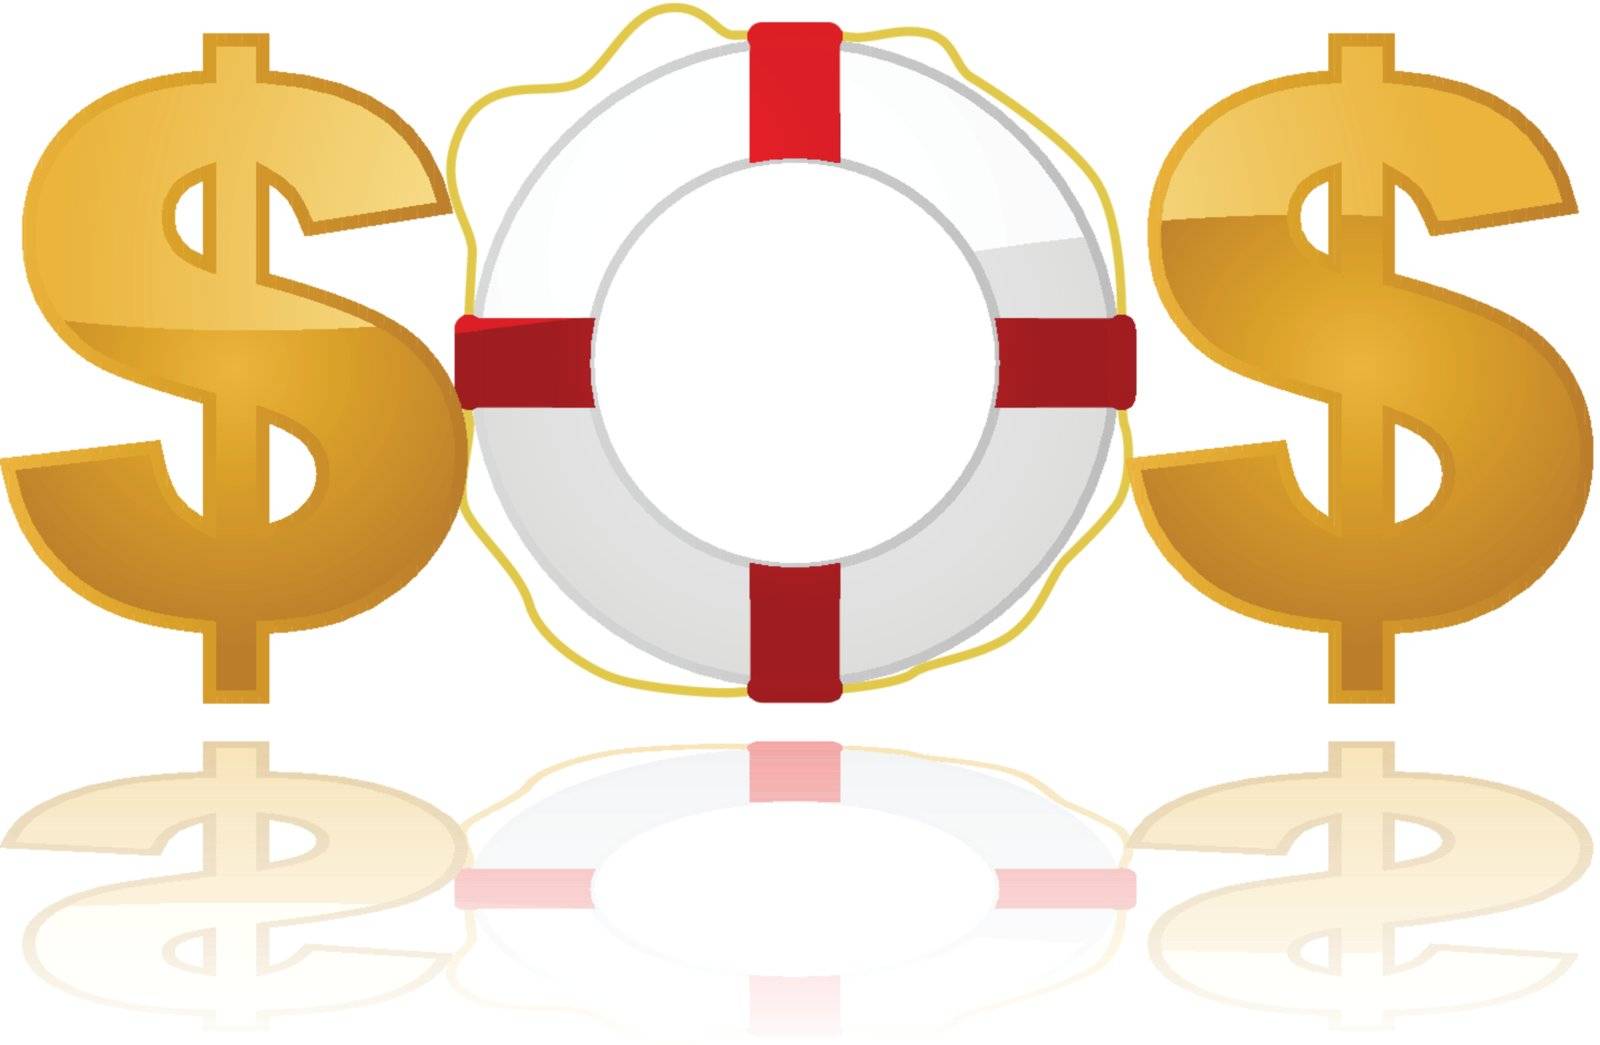 Concept illustration showing a lifesaver between two $ signs, spelling out the emergency code SOS